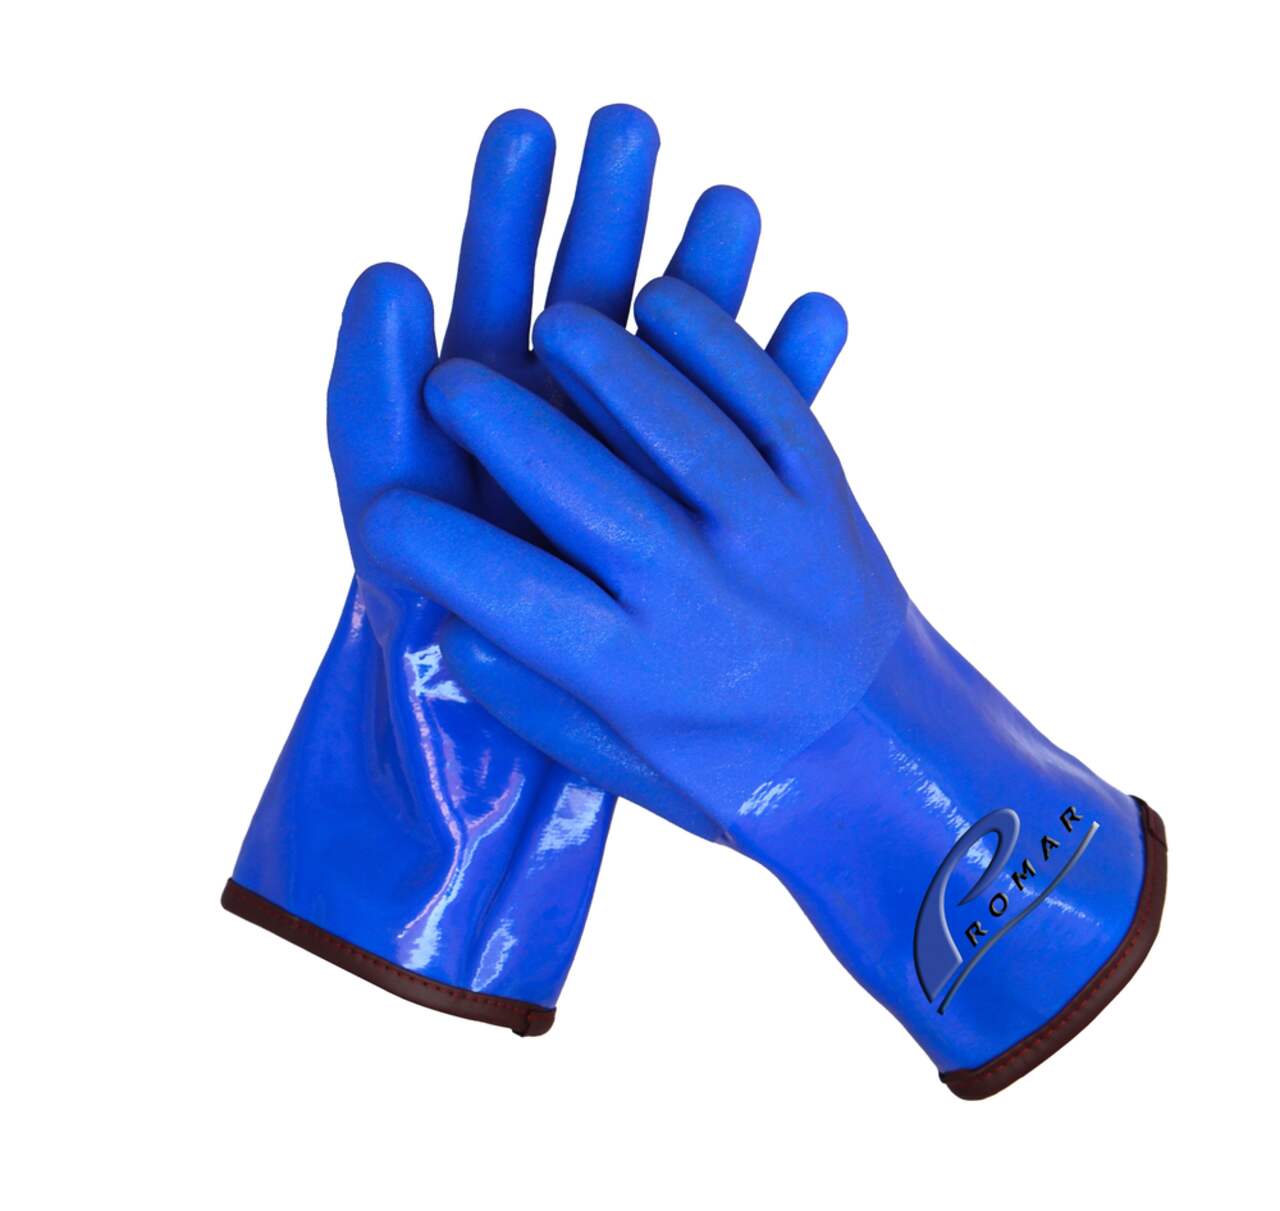 https://media-www.canadiantire.ca/product/playing/fishing/ice-fishing/0771858/promar-insulated-pro-grip-gloves-l-blue-7f49ee21-cdec-4153-9955-b7a94d5721dc.png?imdensity=1&imwidth=640&impolicy=mZoom